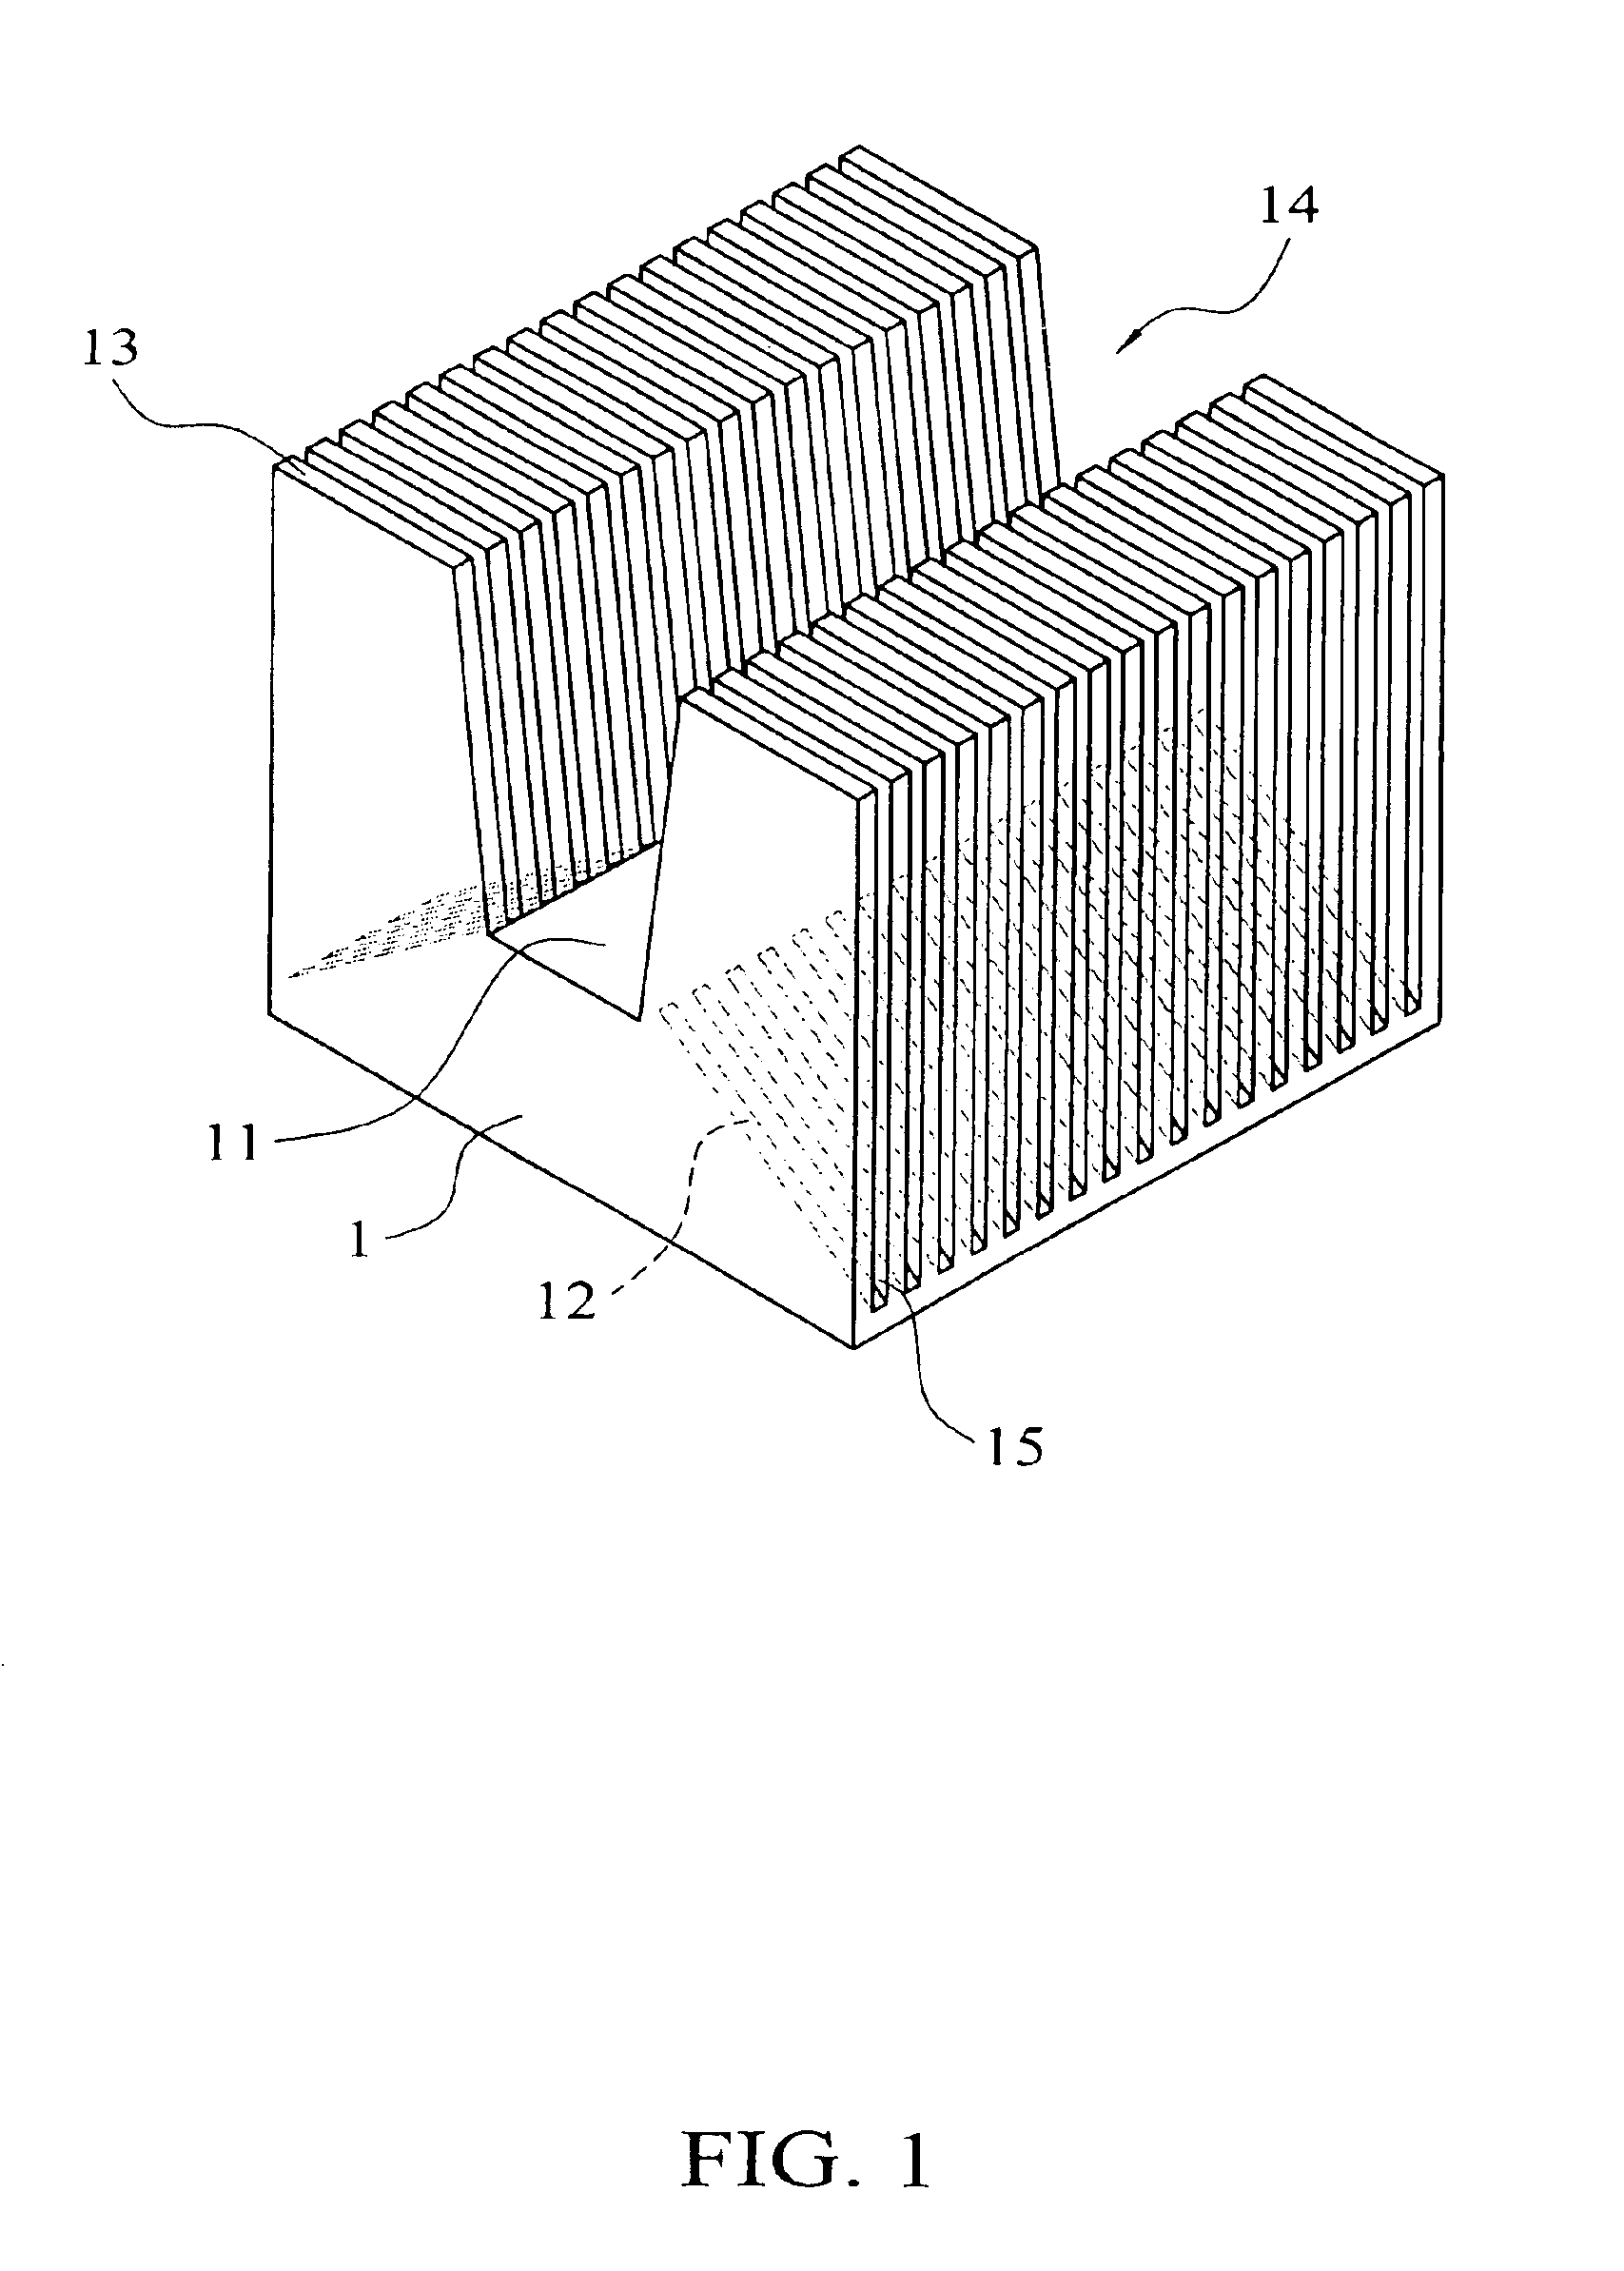 Heat sink with guiding fins